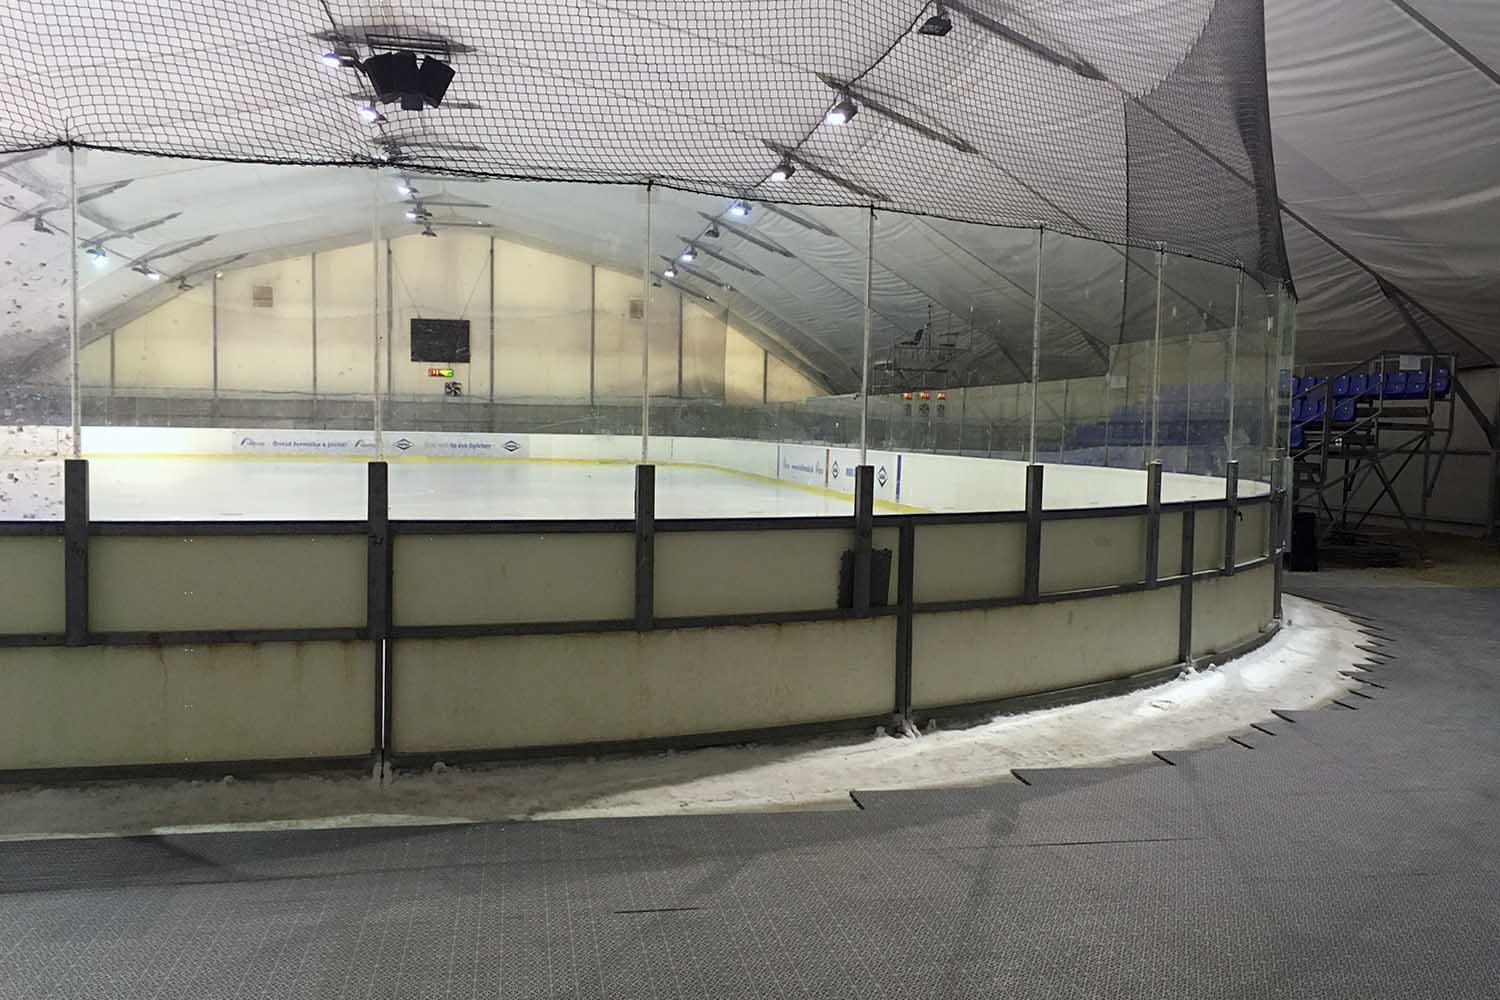 The first HDTS hockey center in Hungary